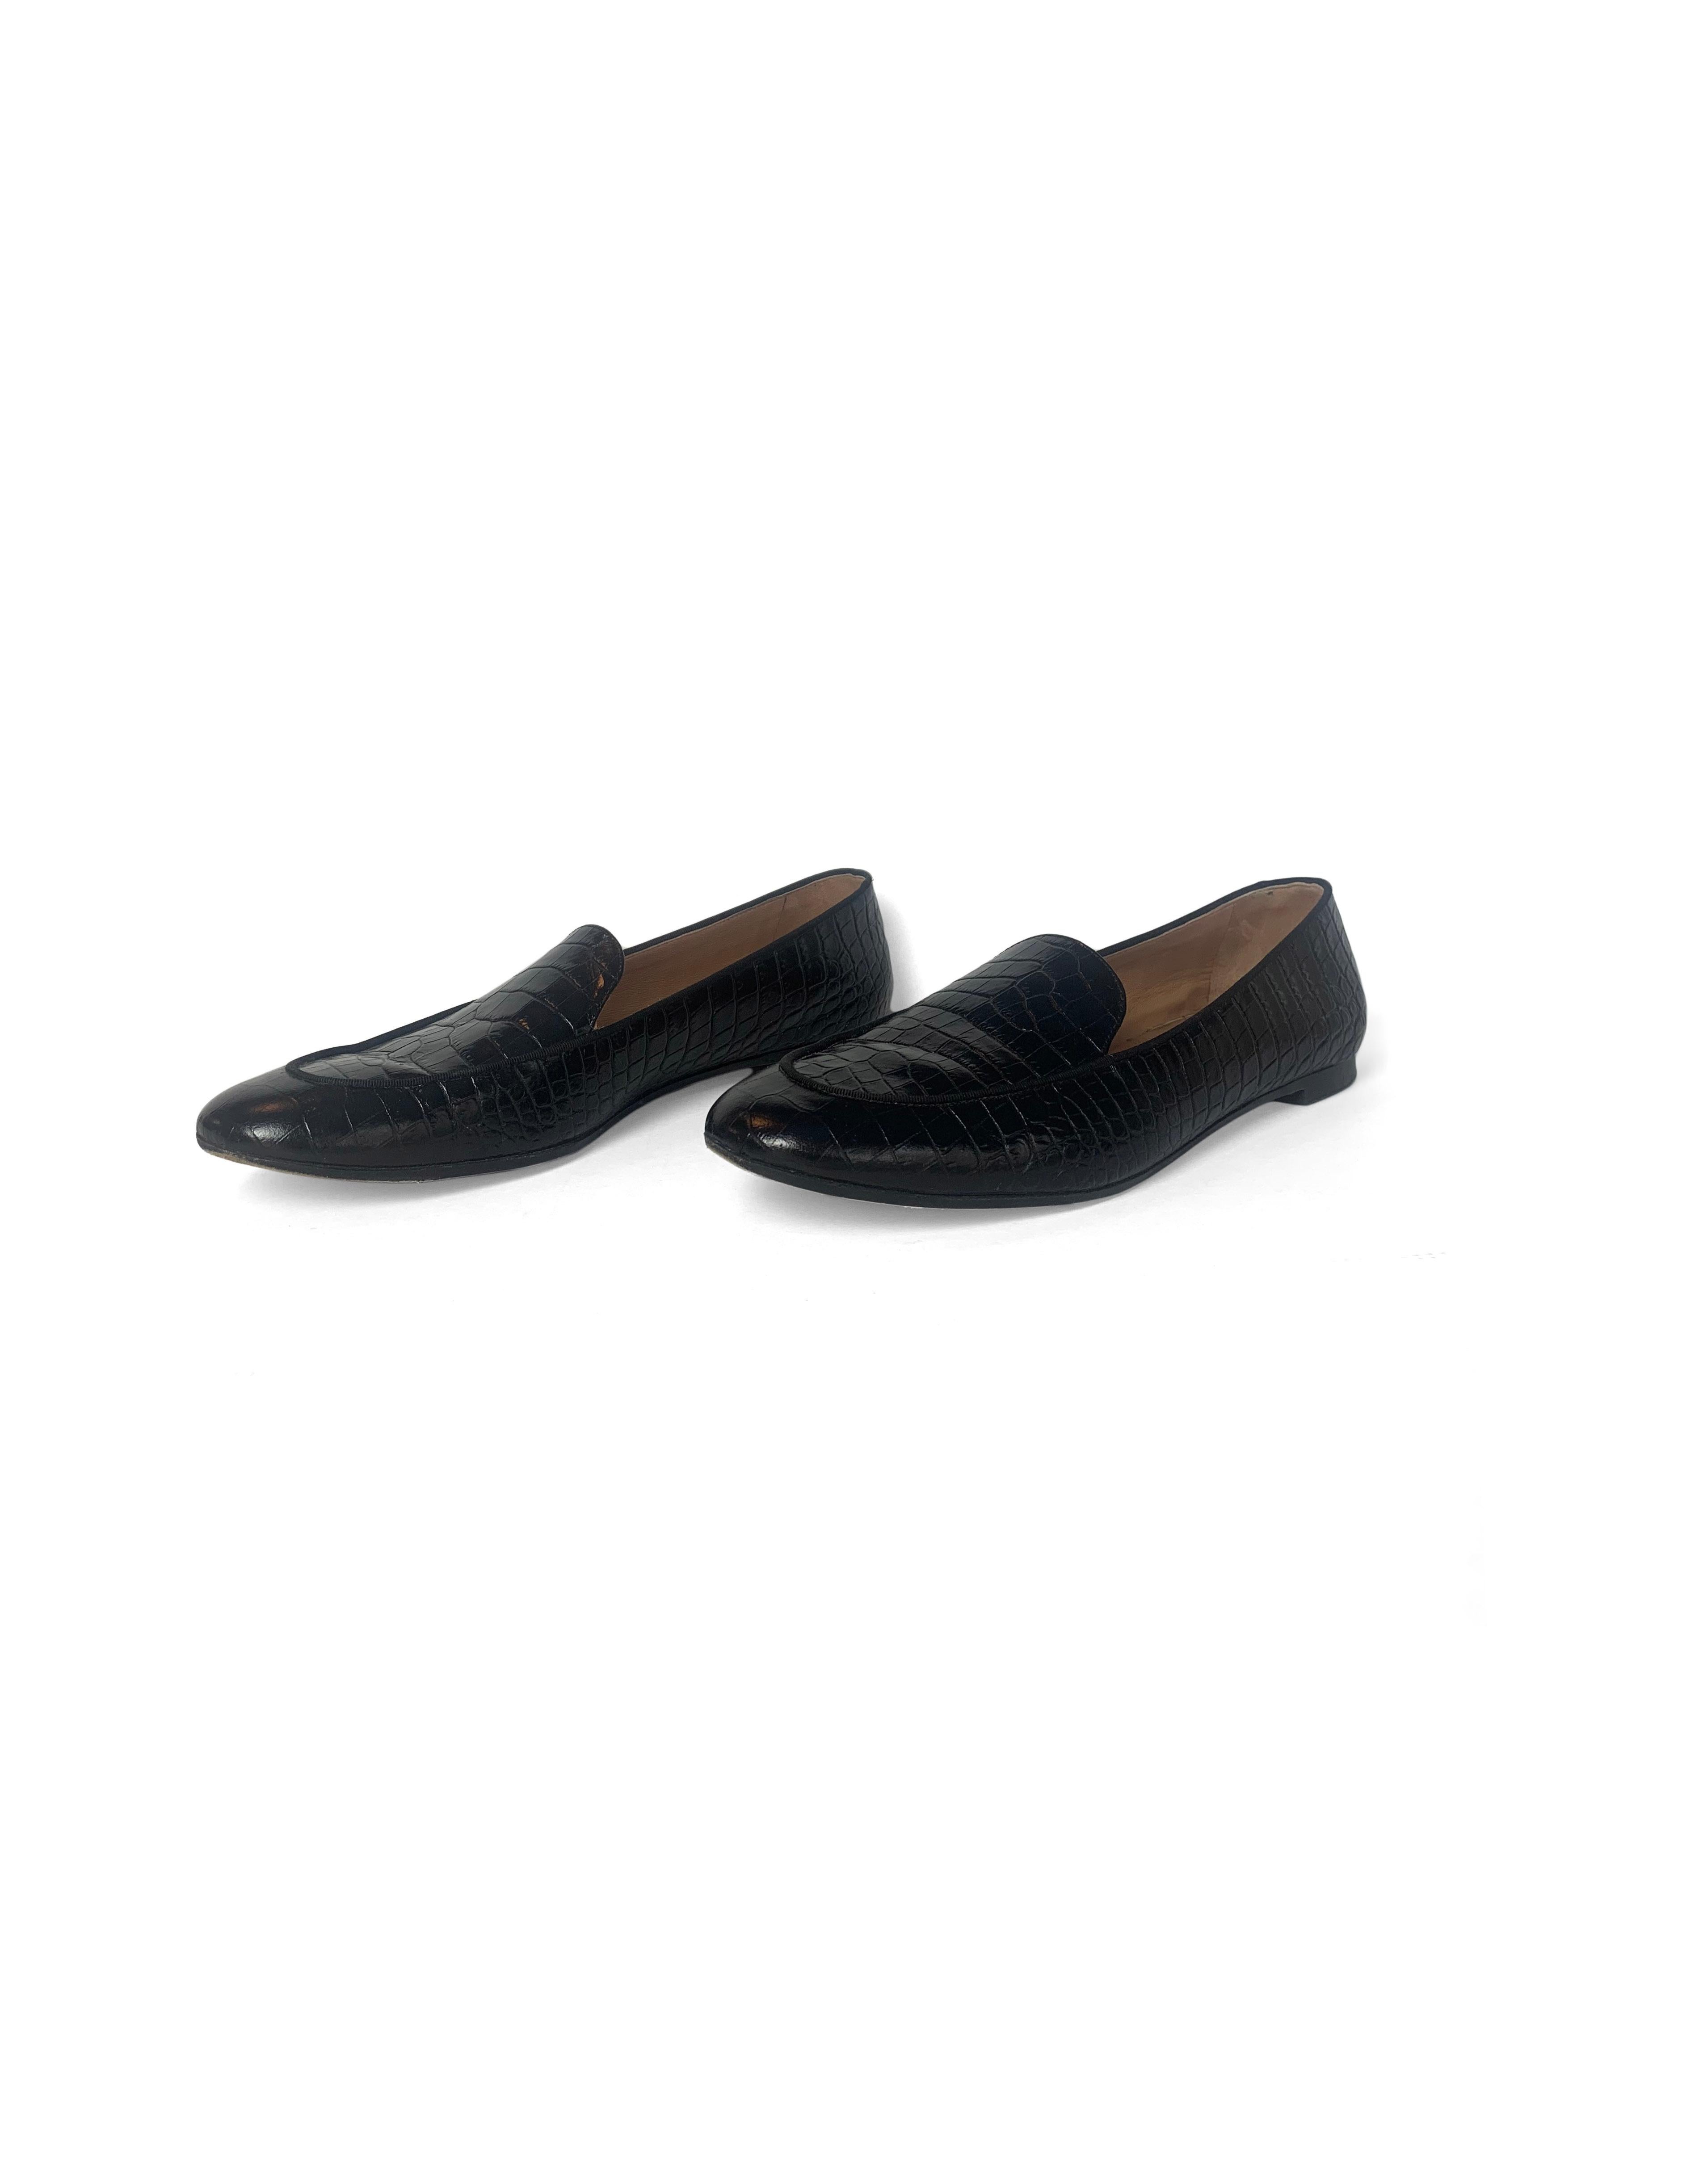 Aquazzura Black Purist Glossed Crocodile-Effect Leather Loafers
Made In: Italy
Year of Production: 2019-2020
Color: Black
Materials: Embossed glossed calf leather and grosgrain
Closure/Opening: Slip on
Overall Condition: Excellent pre-owned